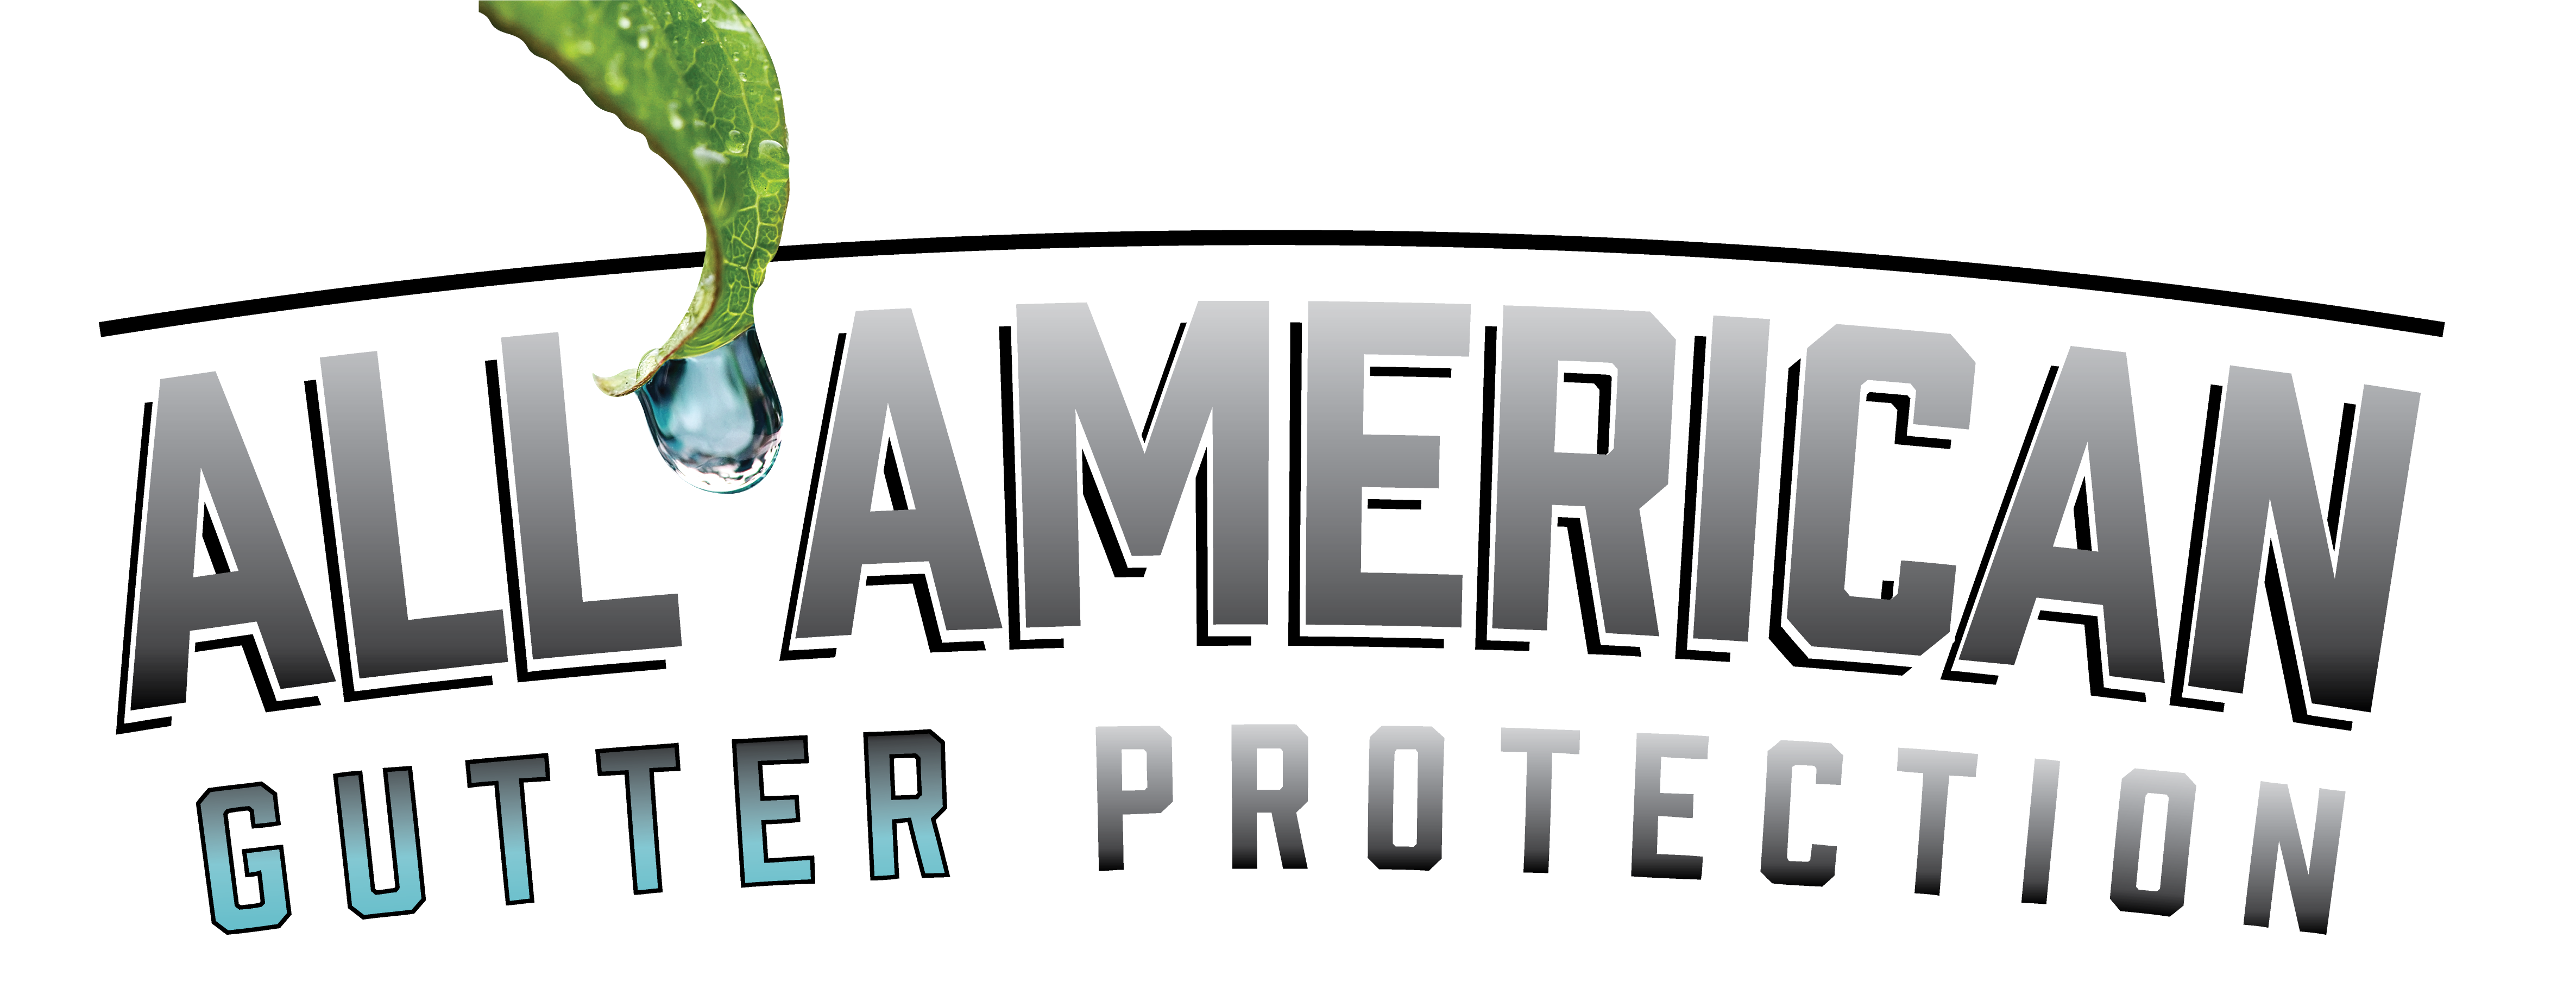 All American Gutter Protection Logo